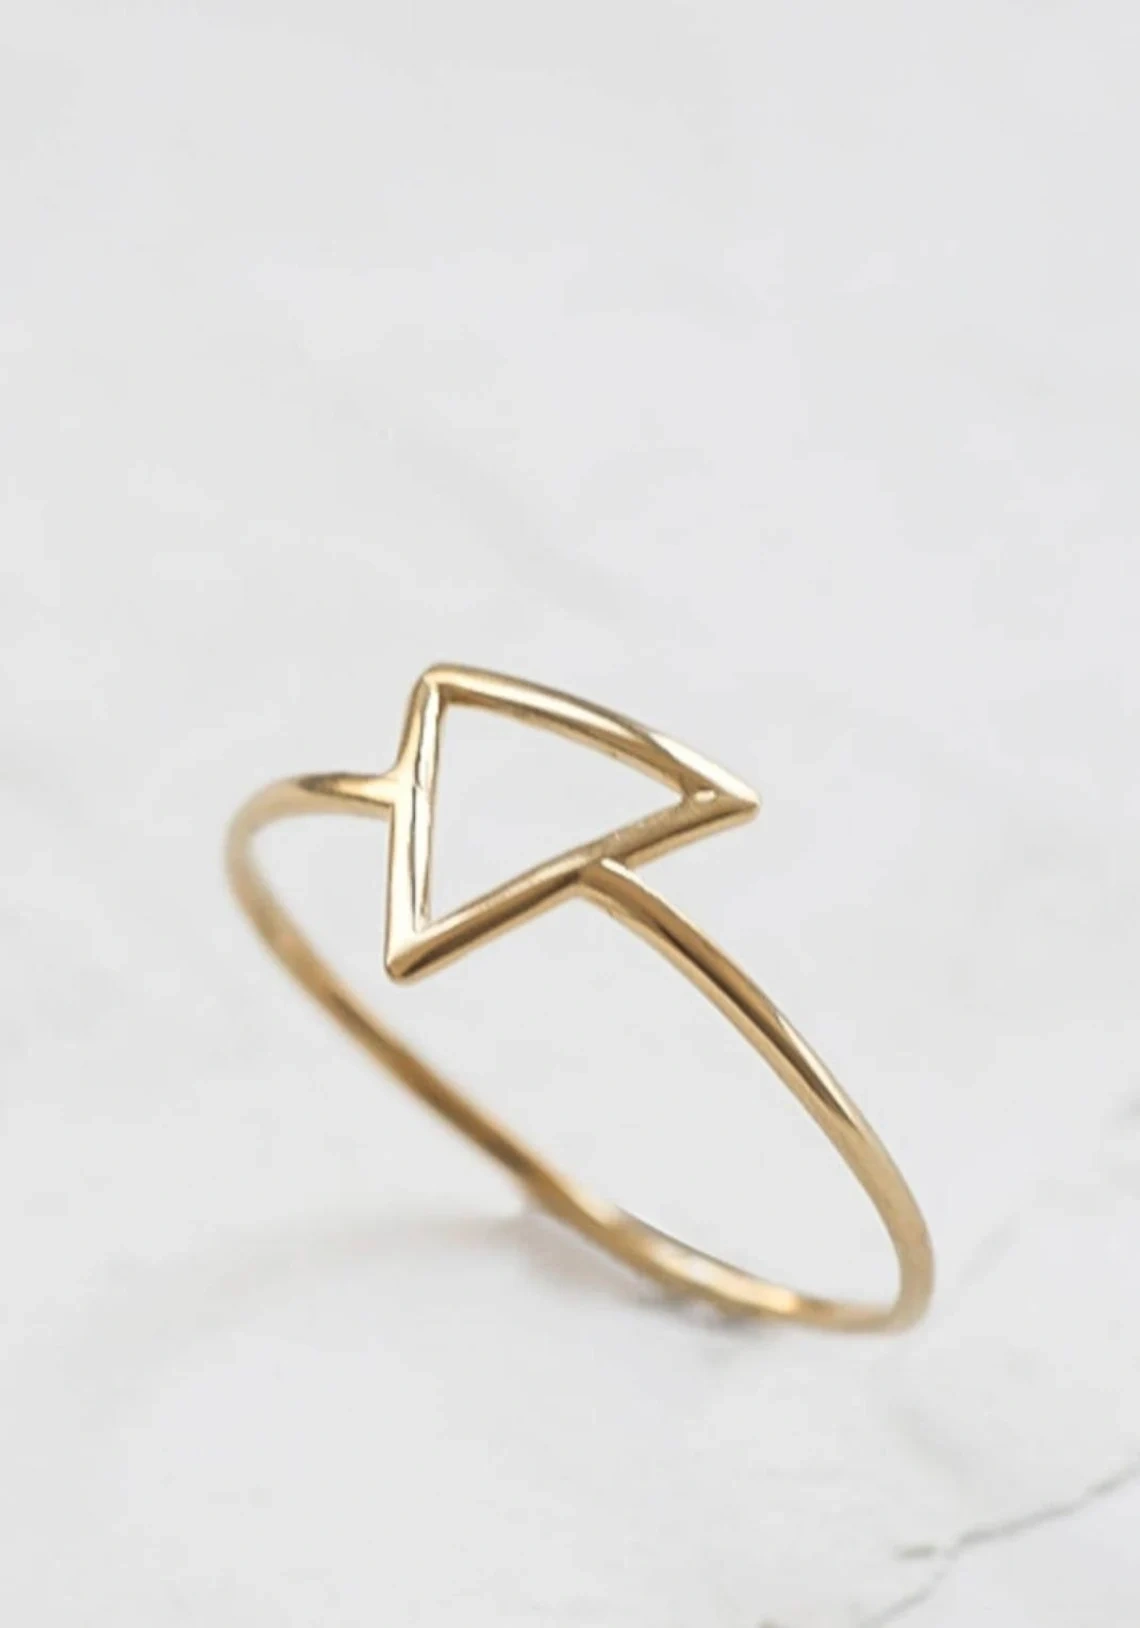 10K Solid Gold Tiny Hollow Triangle Ring Handmade Delicate Midi Geometric Stacking Ring Dainty Minimalist Statement Gold knuckle Bohu Ring-11424072